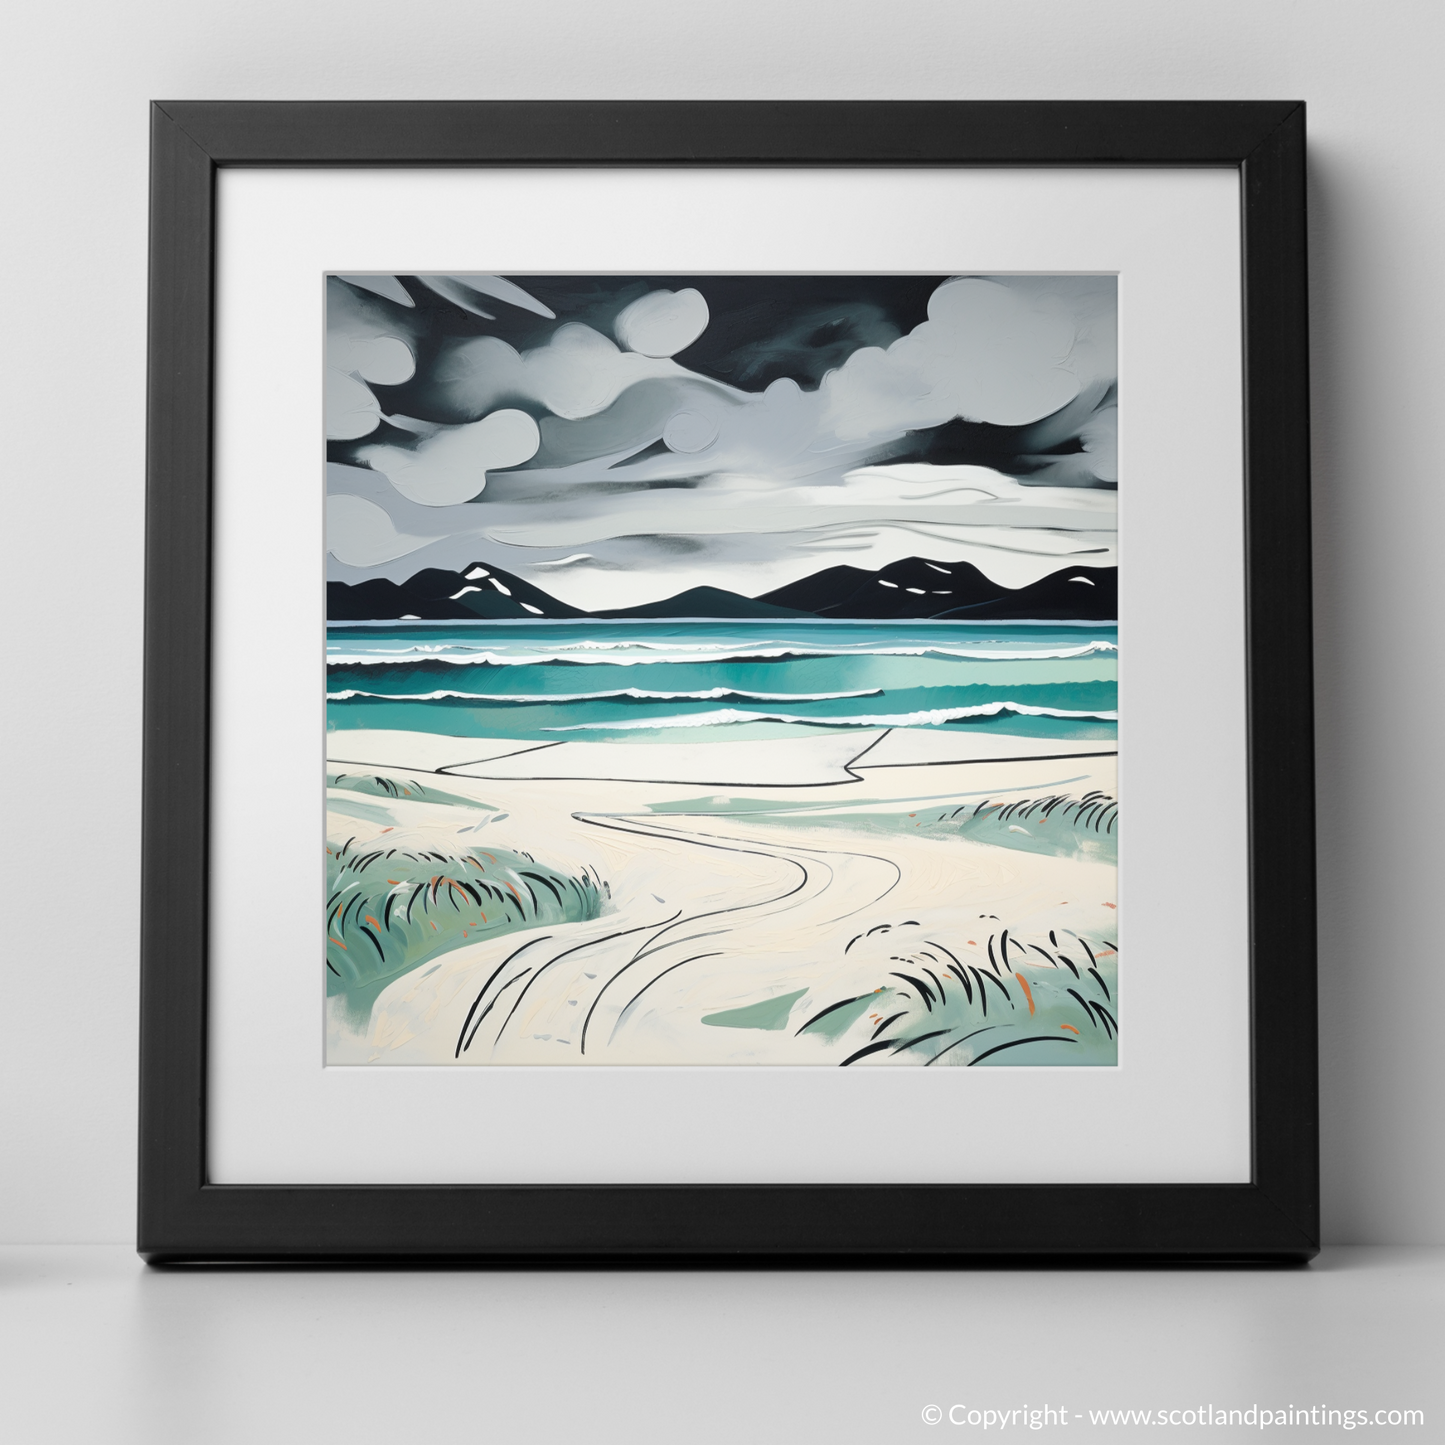 Storm over Luskentyre Sands: A Naive Art Homage to Scottish Shores